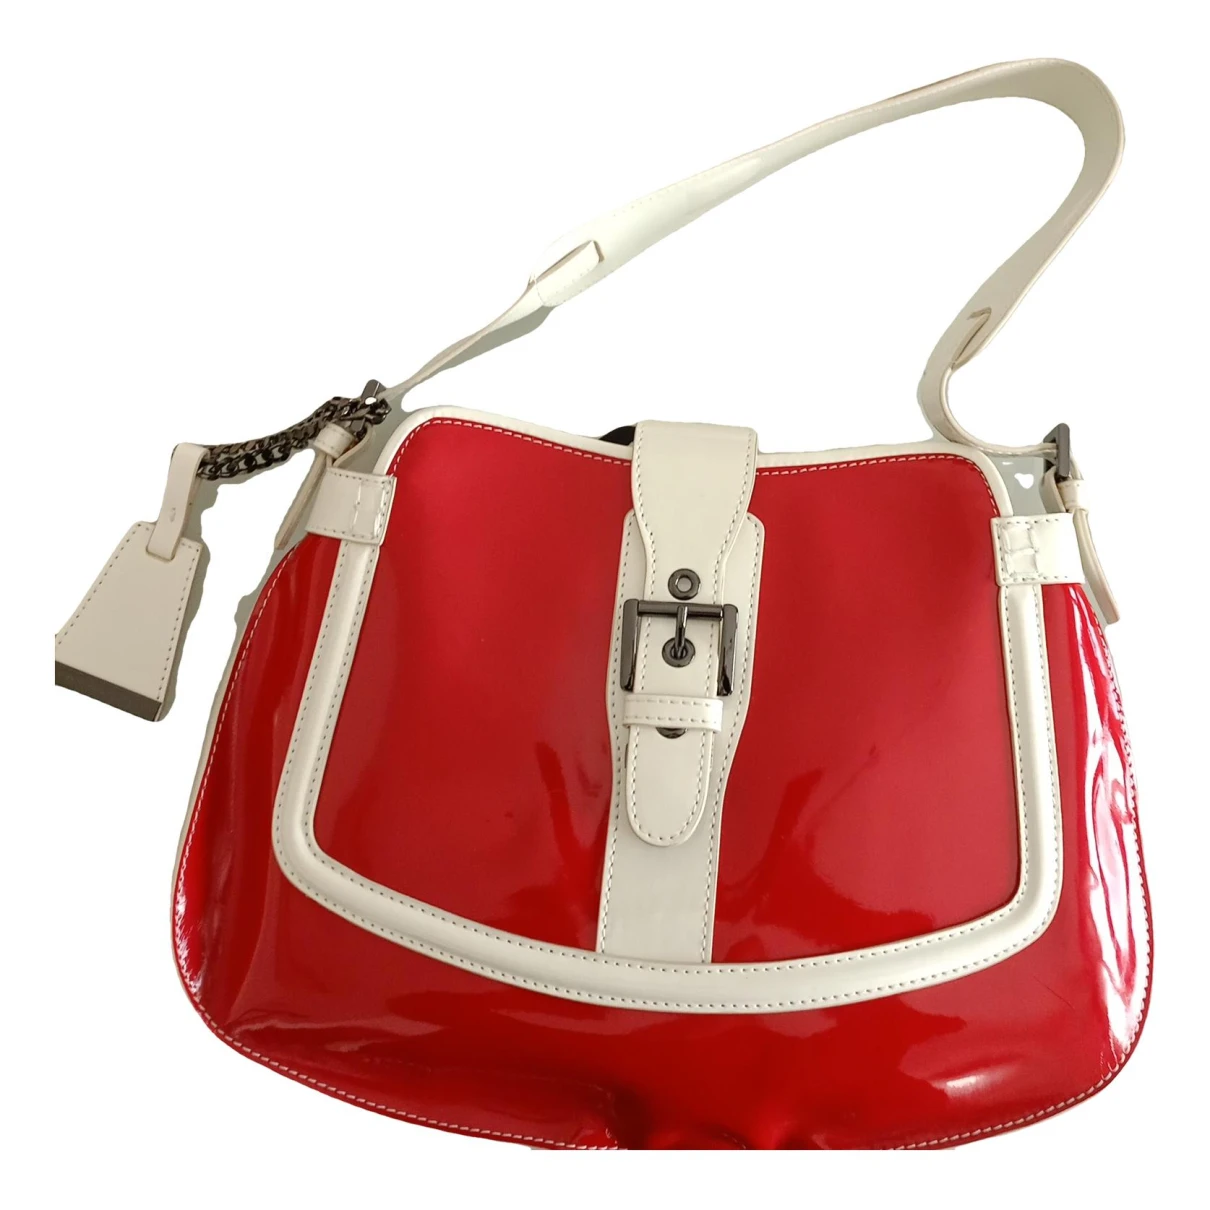 Pre-owned Liviana Conti Patent Leather Handbag In Red